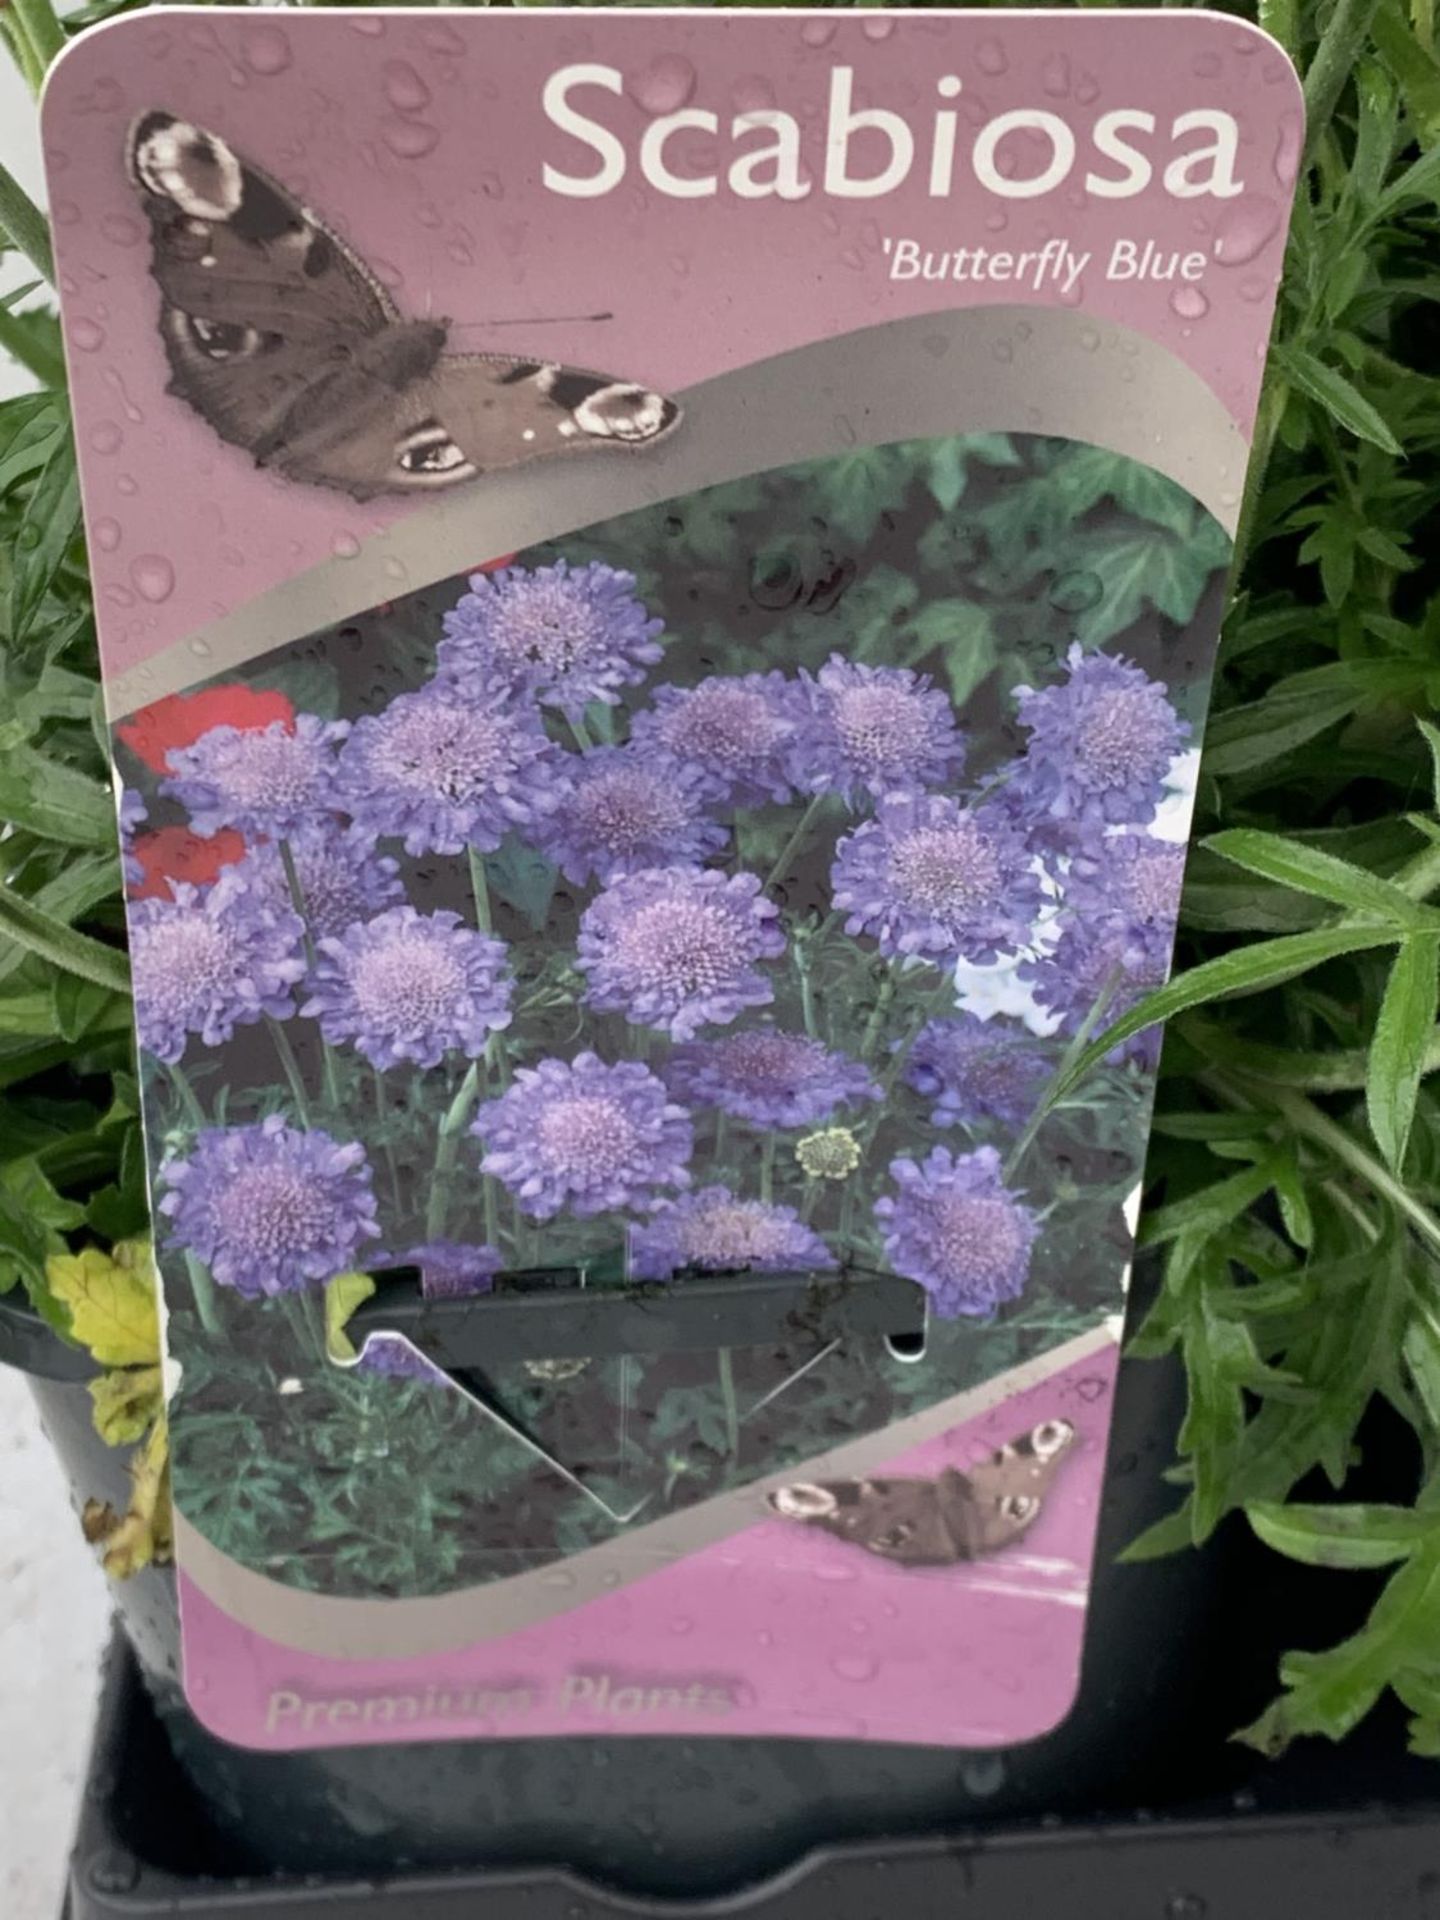 SIX SCABIOSA BUTTERFLY BLUE IN 2 LTR POTS 50-60CM TALL TO BE SOLD FOR THE SIX PLUS VAT - Bild 5 aus 5